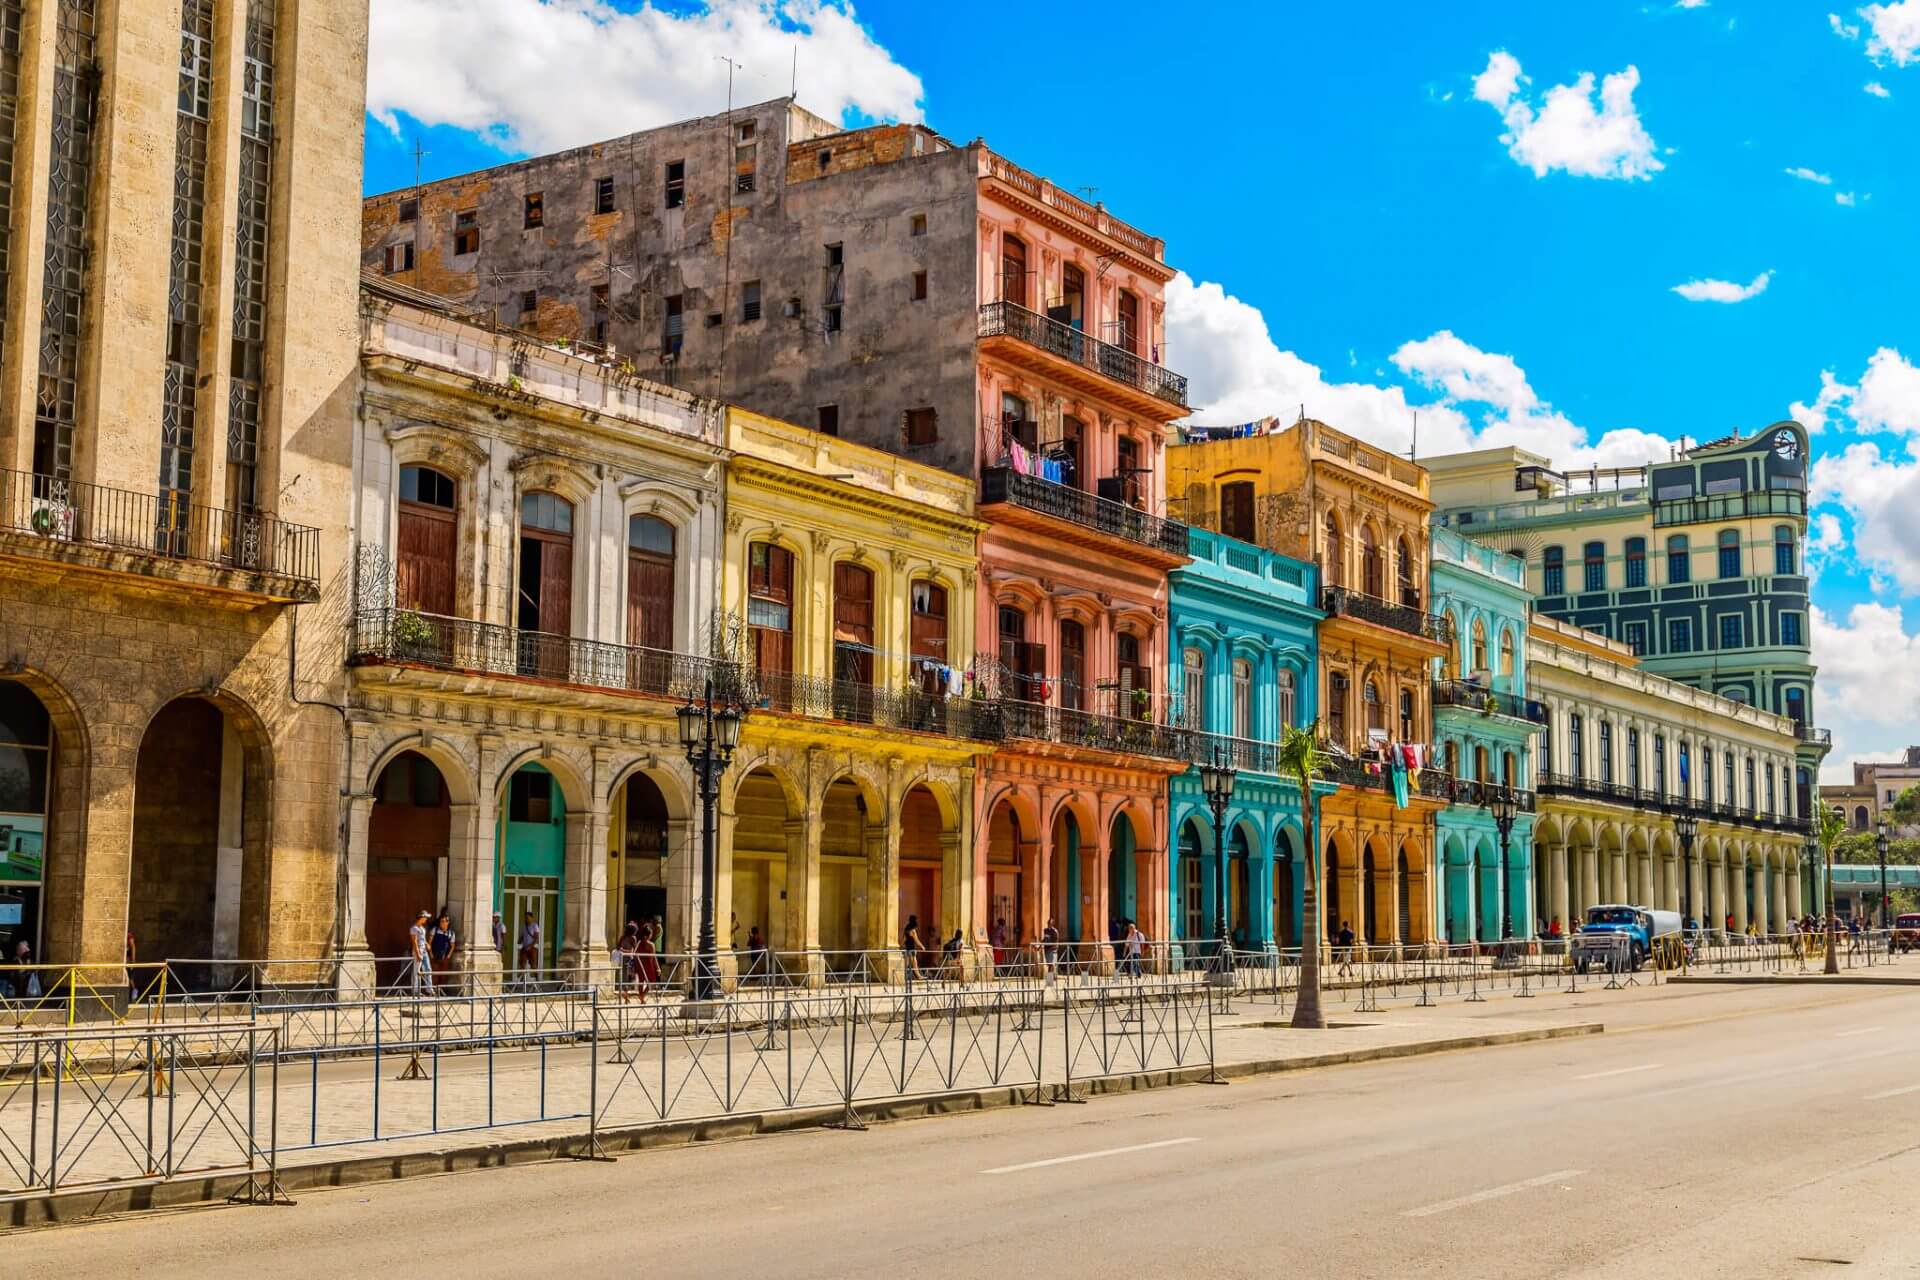 Which year did Havana become the capital of Cuba?